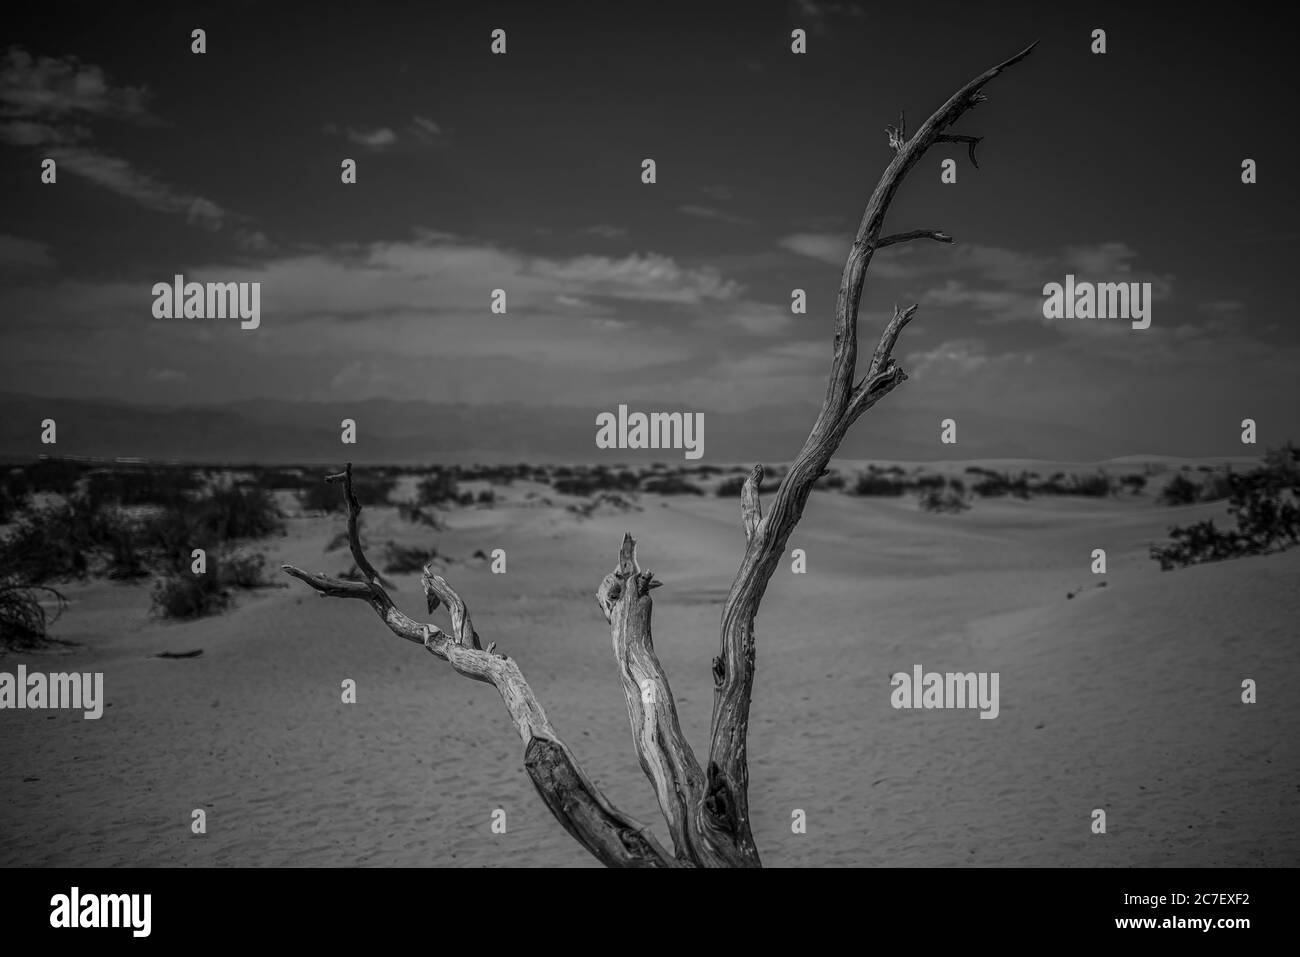 Horizontal greyscale shot of a dry tree stick in the desert surrounded by bushes Stock Photo